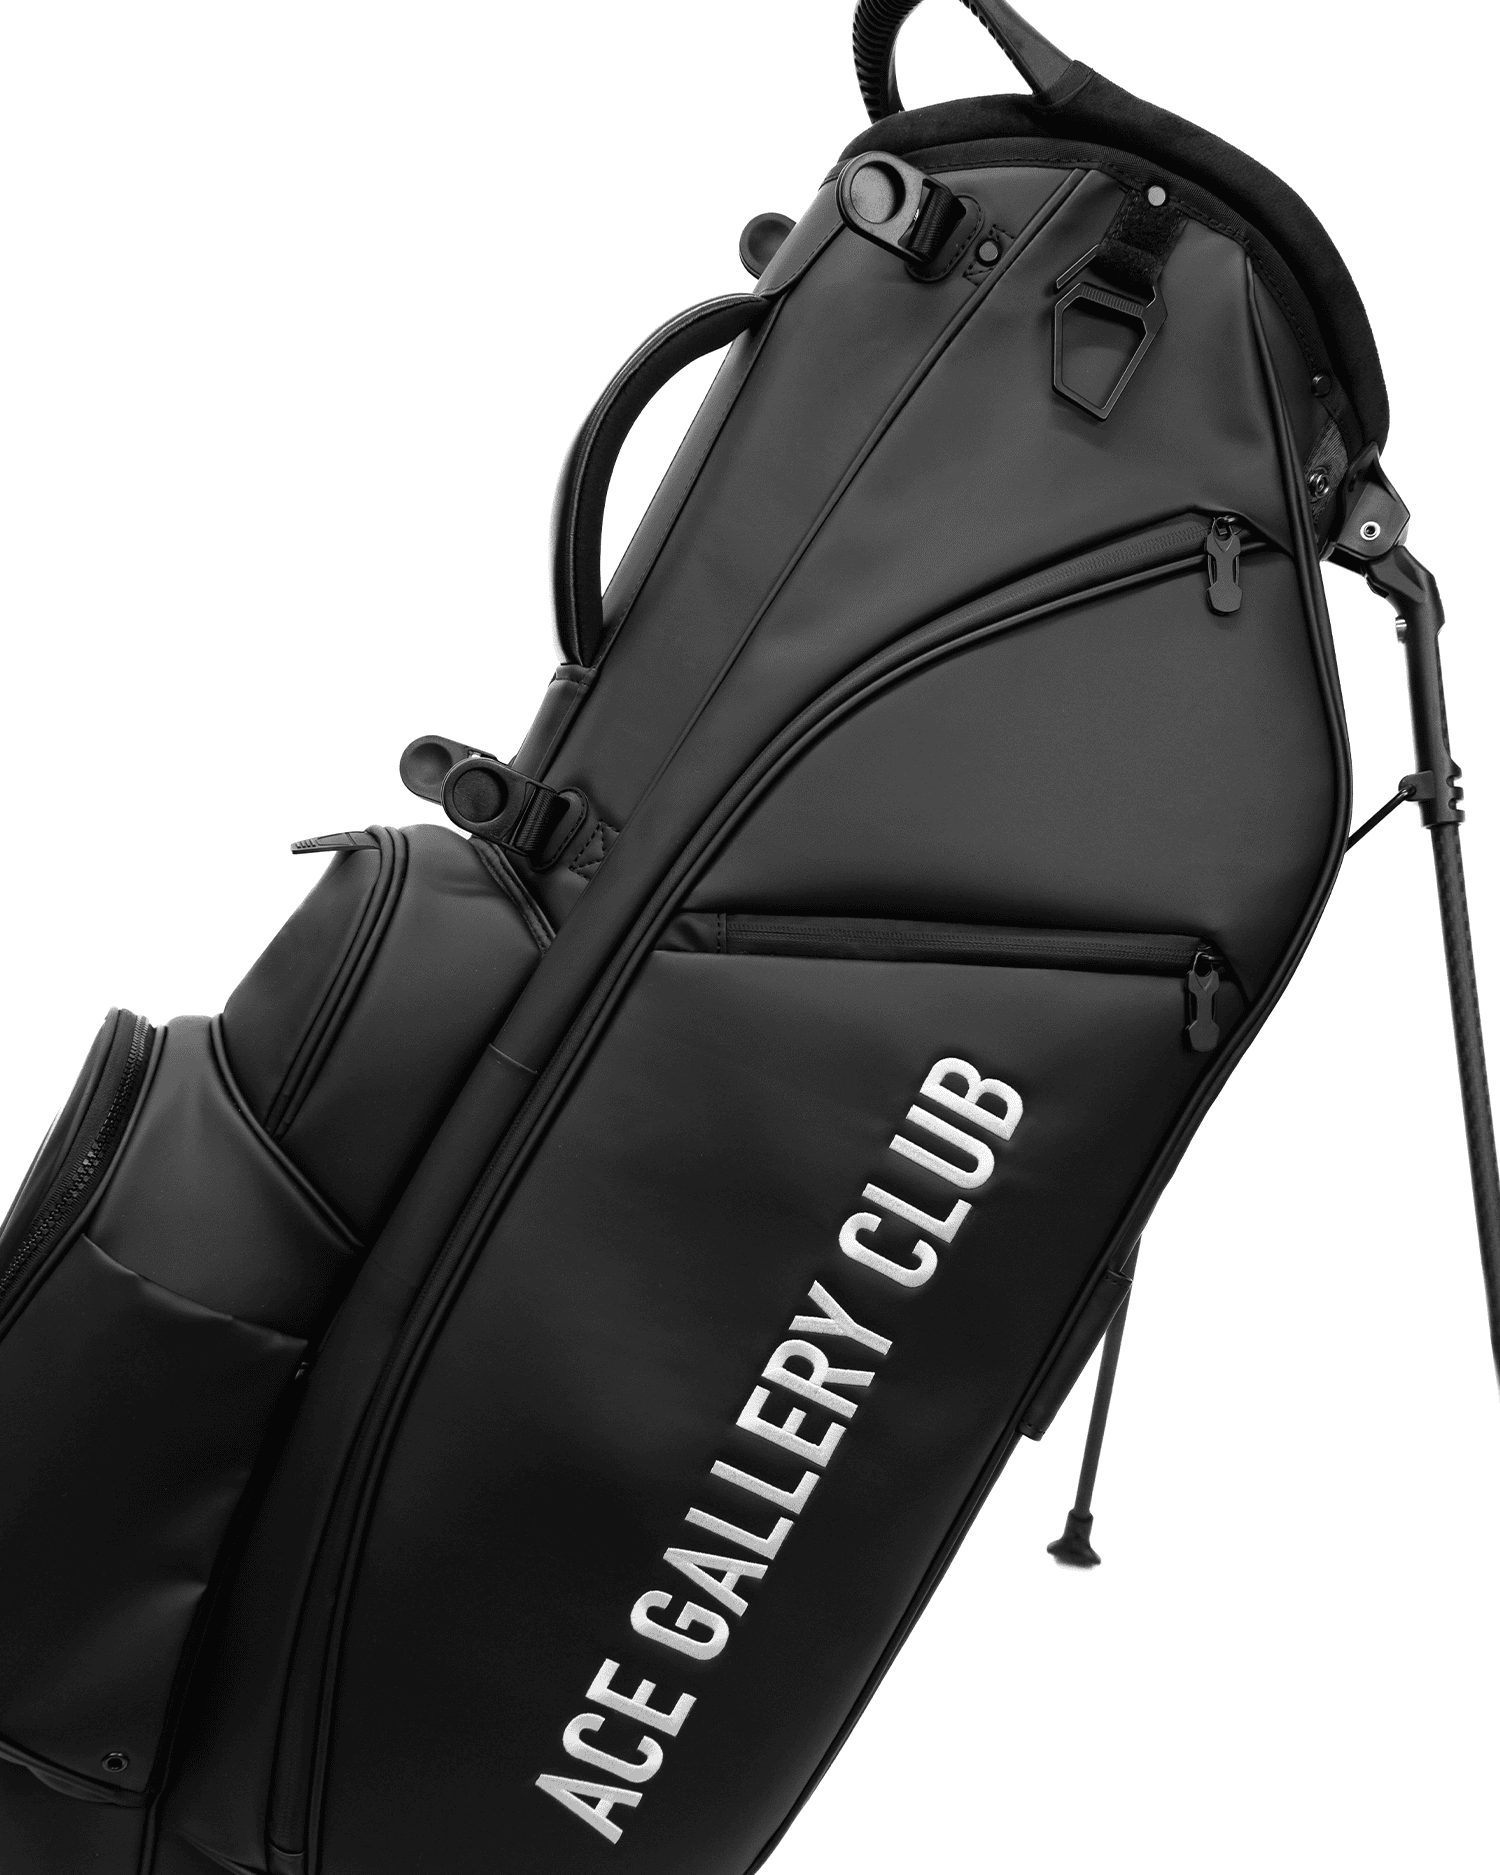 ACE GALLERY CLUB STAND BAG - BLACK